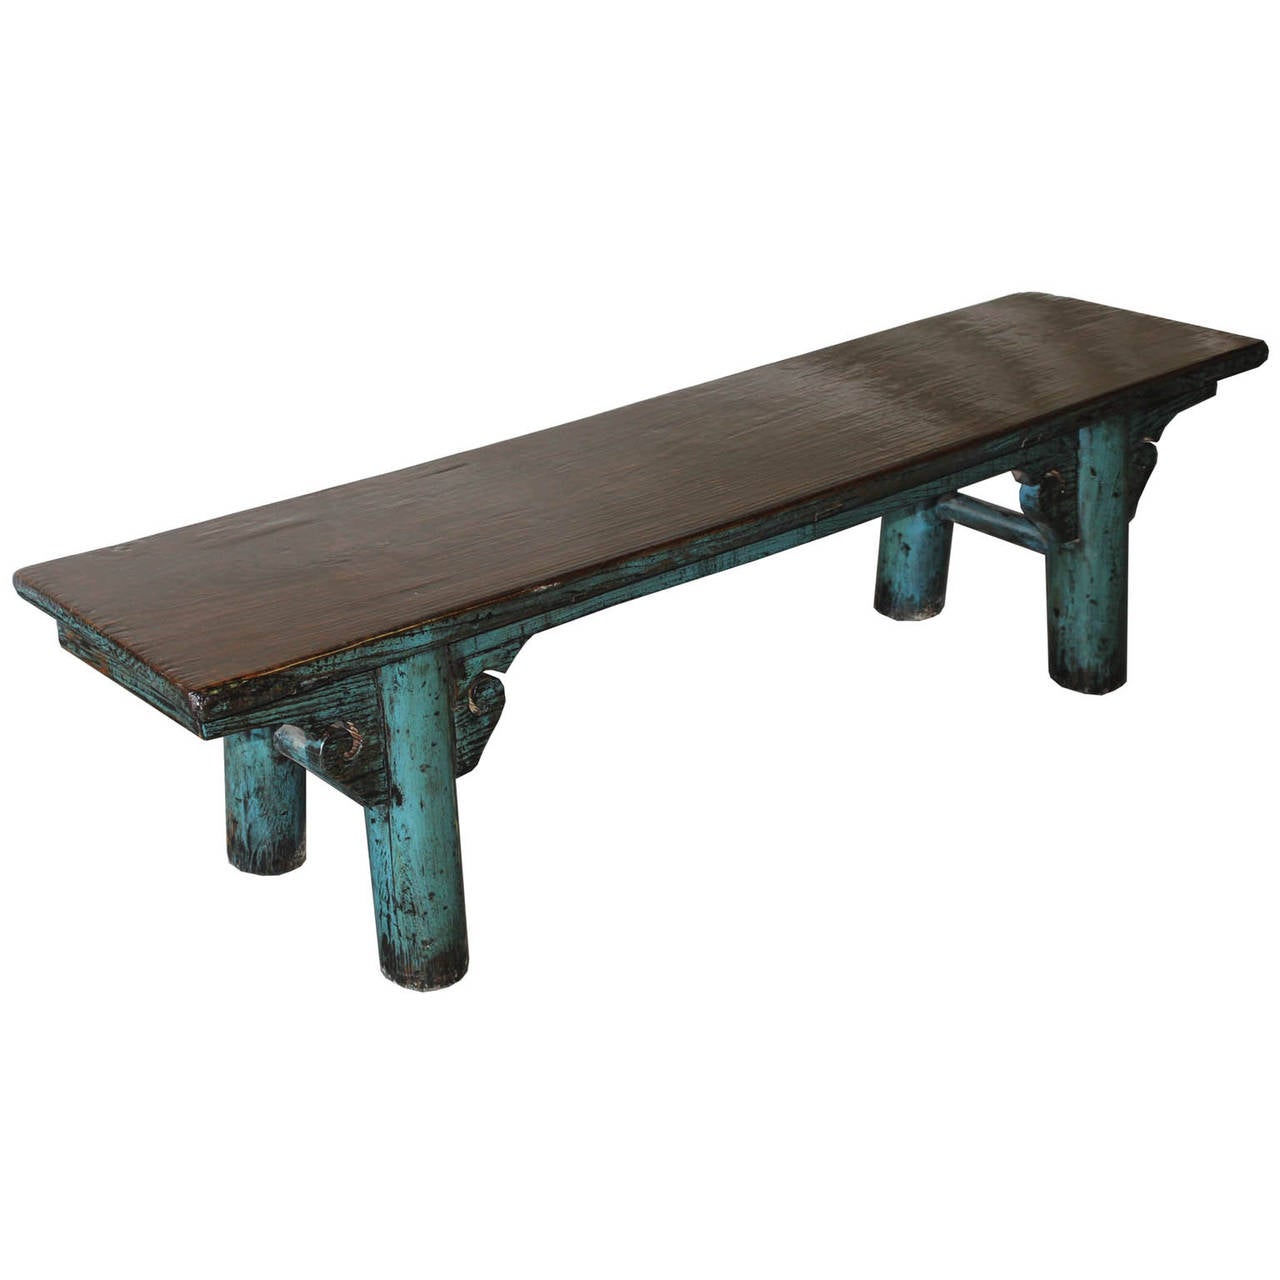 Blue lacquer bench with beautiful grained elm wood top has round legs and carved spandrels. Use in a living room for seating, at the end of a bed, or as a long coffee table. China circa 1880s.